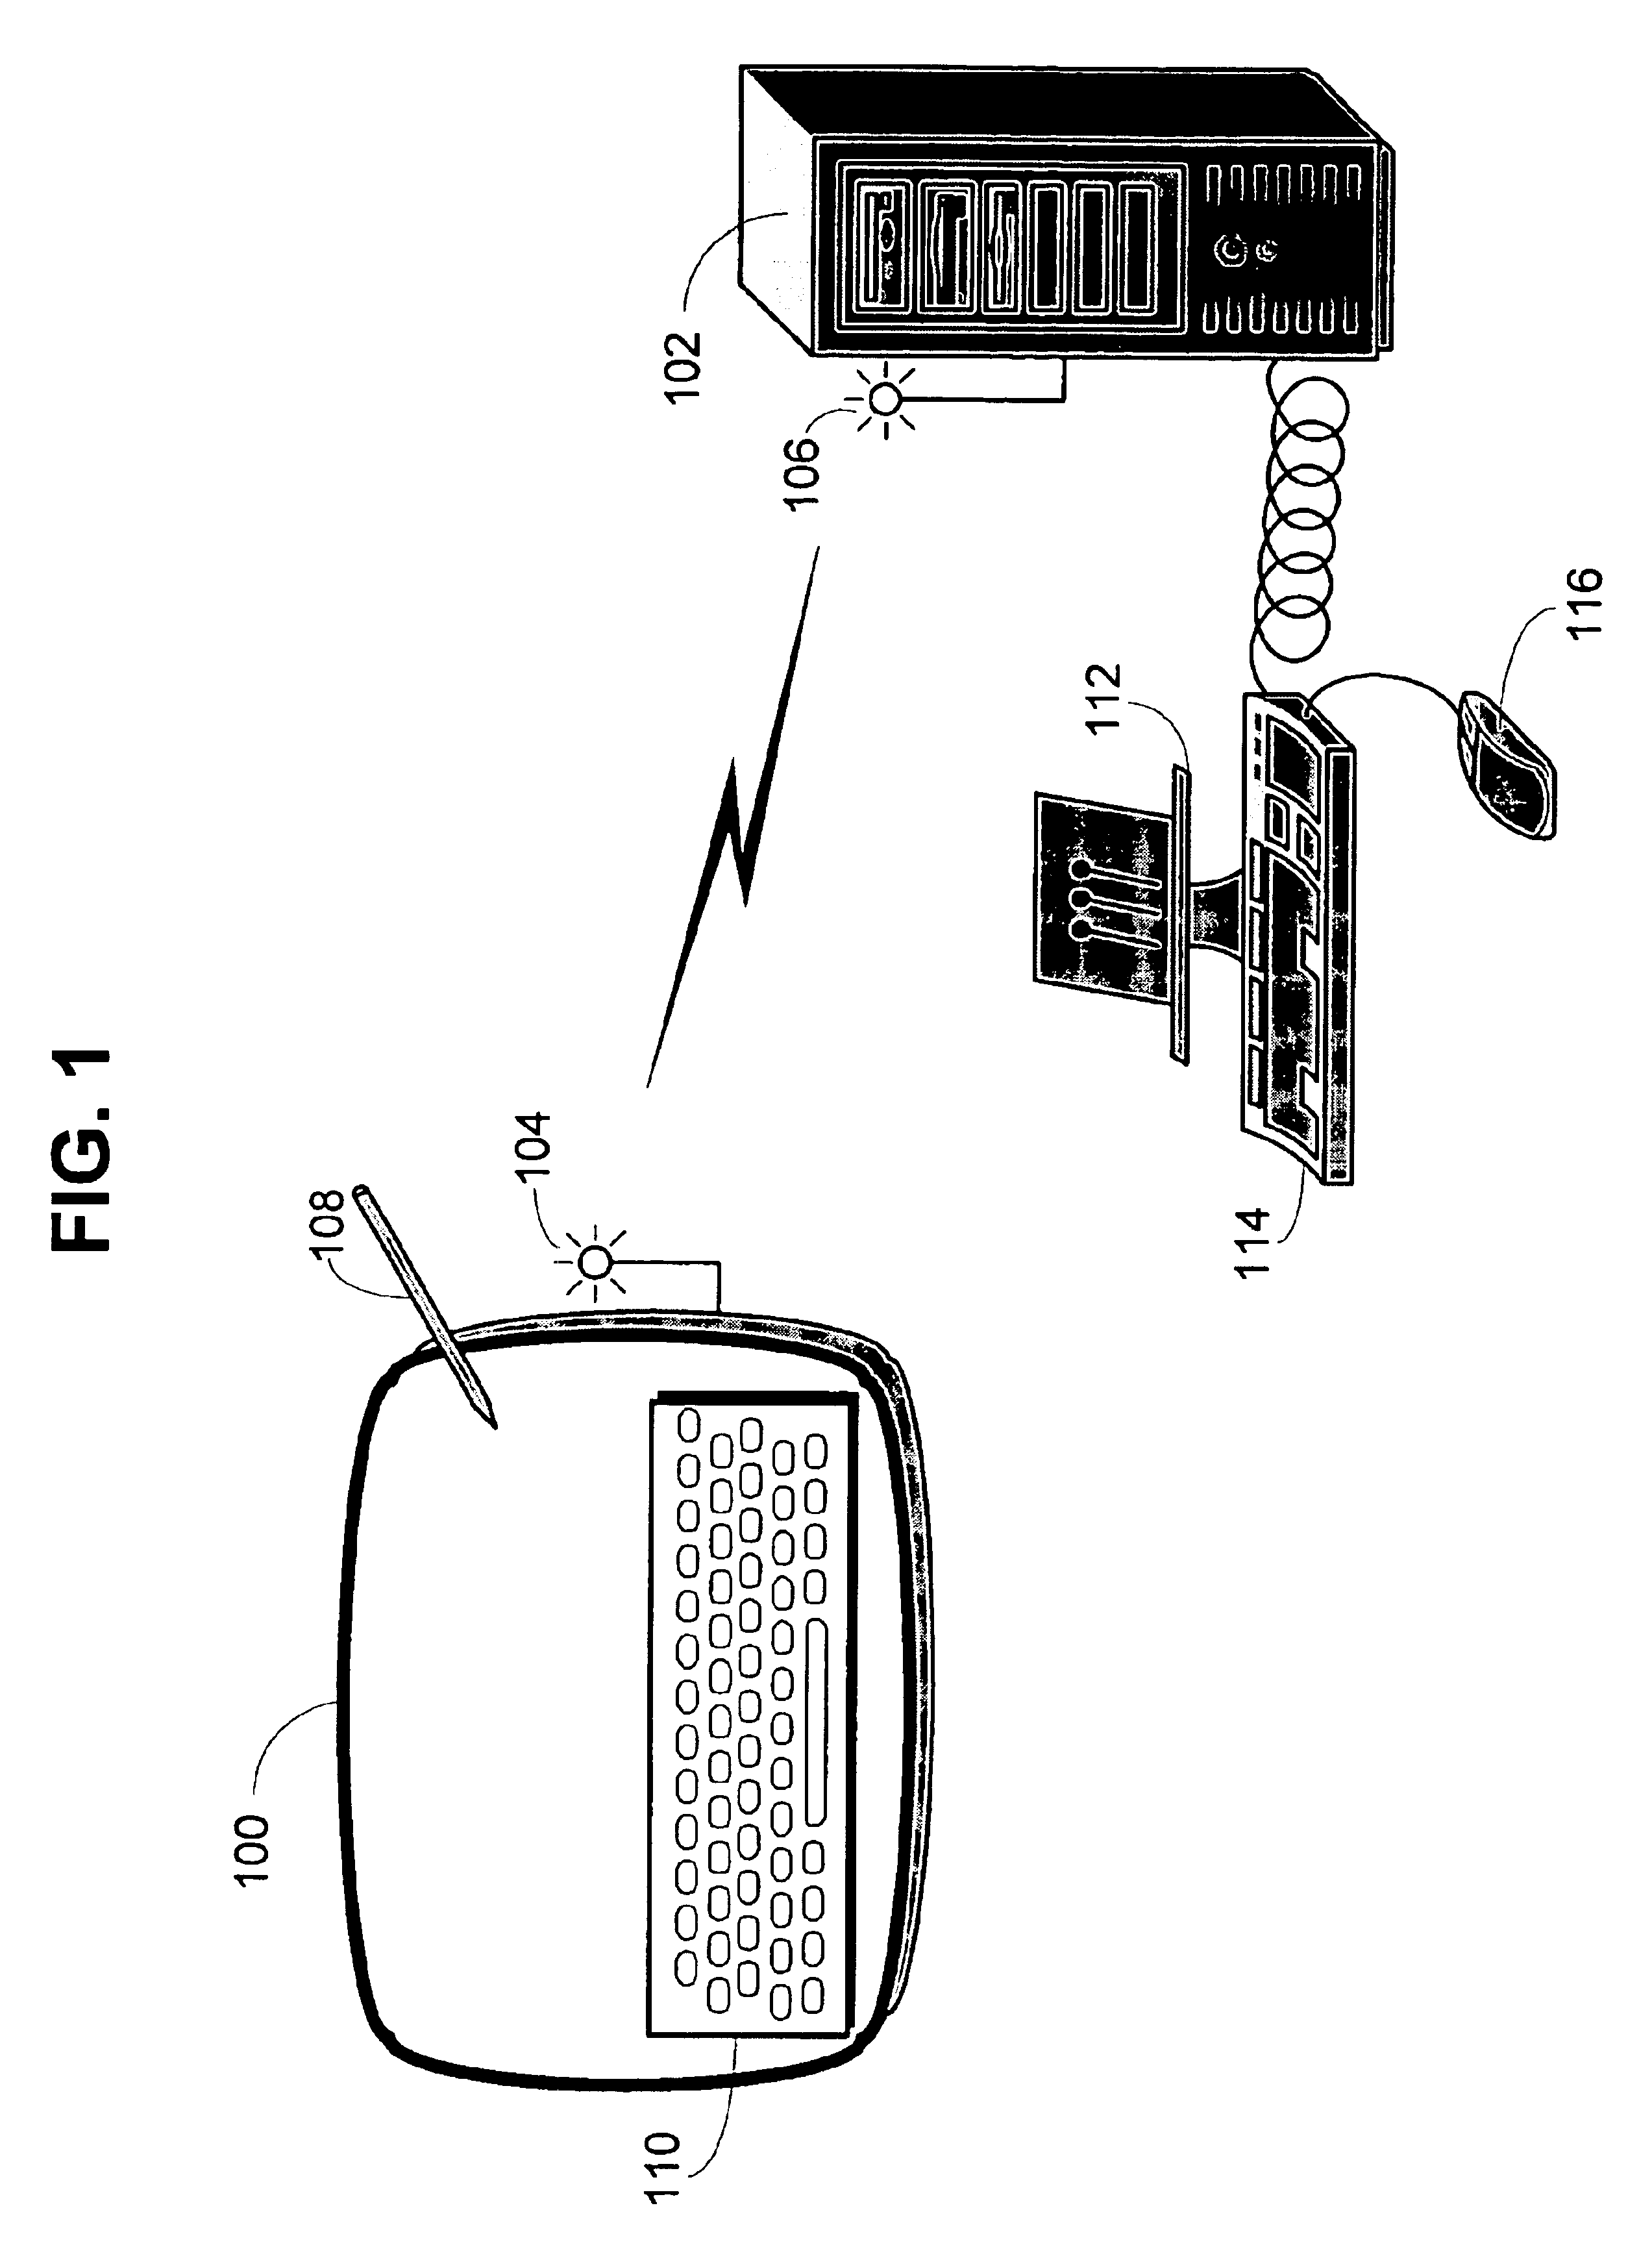 Method and system for using a keyboard overlay with a touch-sensitive display screen